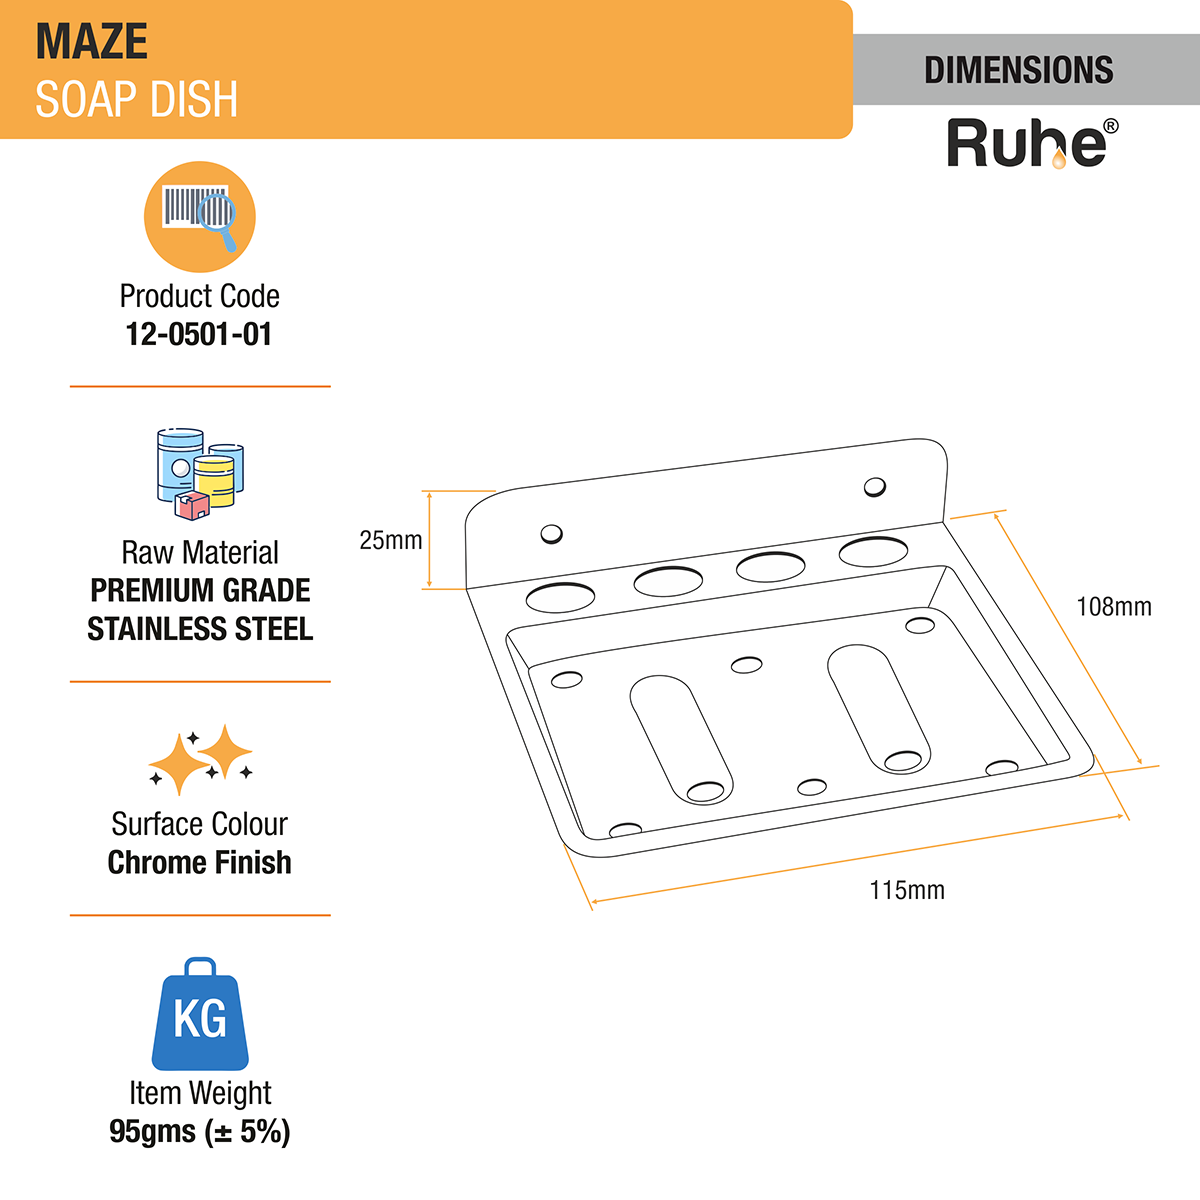 Maze Stainless Steel Soap Dish dimensions and size